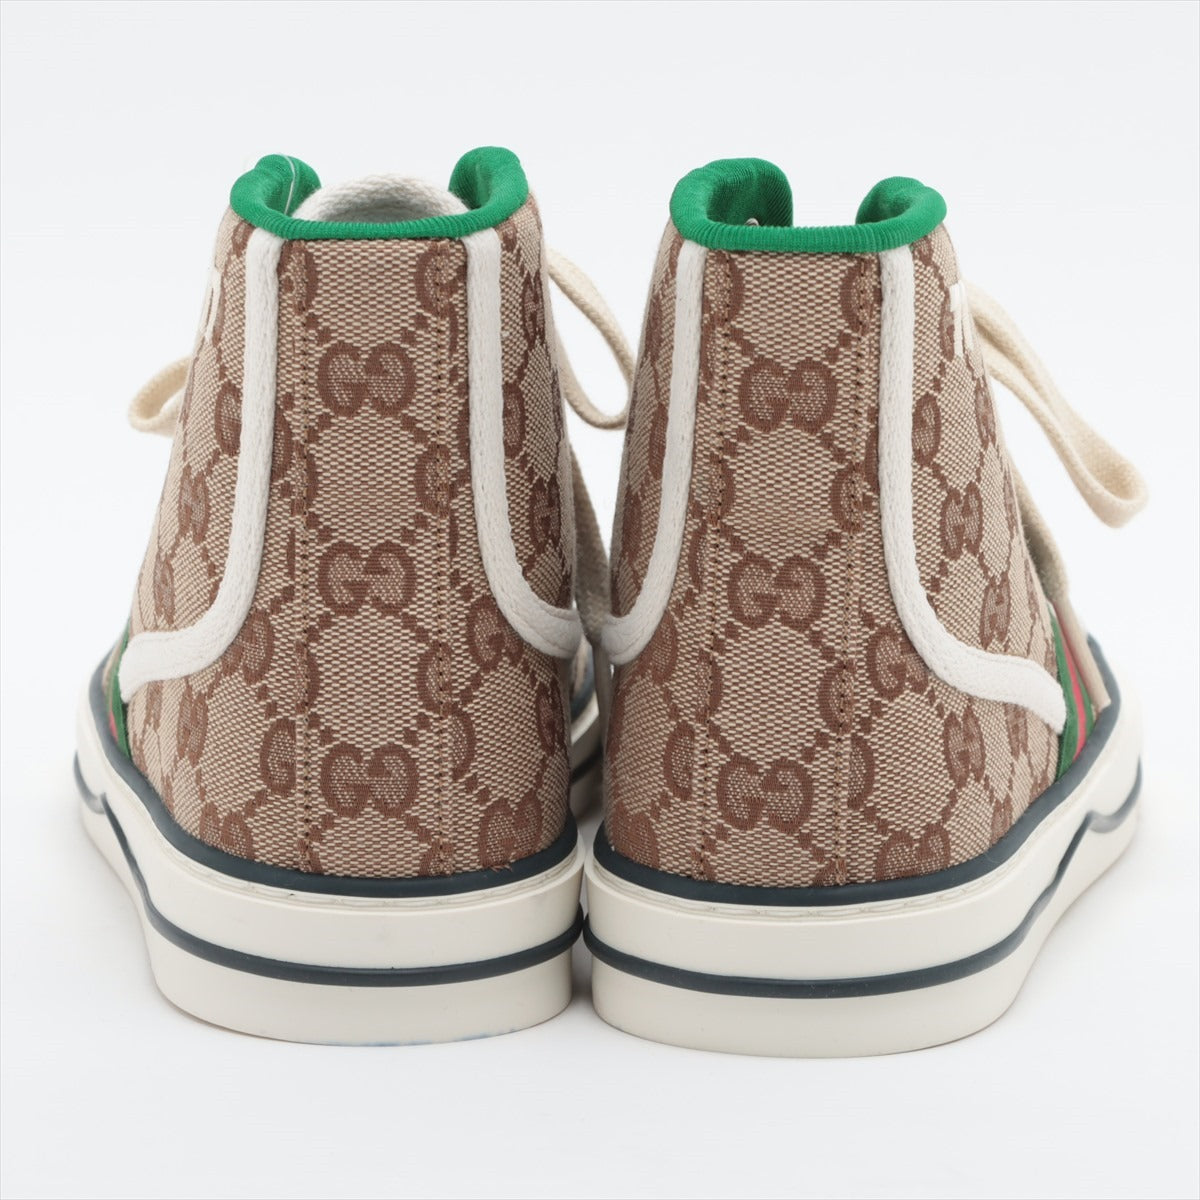 Gucci GG pattern Fabric High-top Sneakers 37+ Ladies' Brown TENNIS 1977 Is there a replacement string